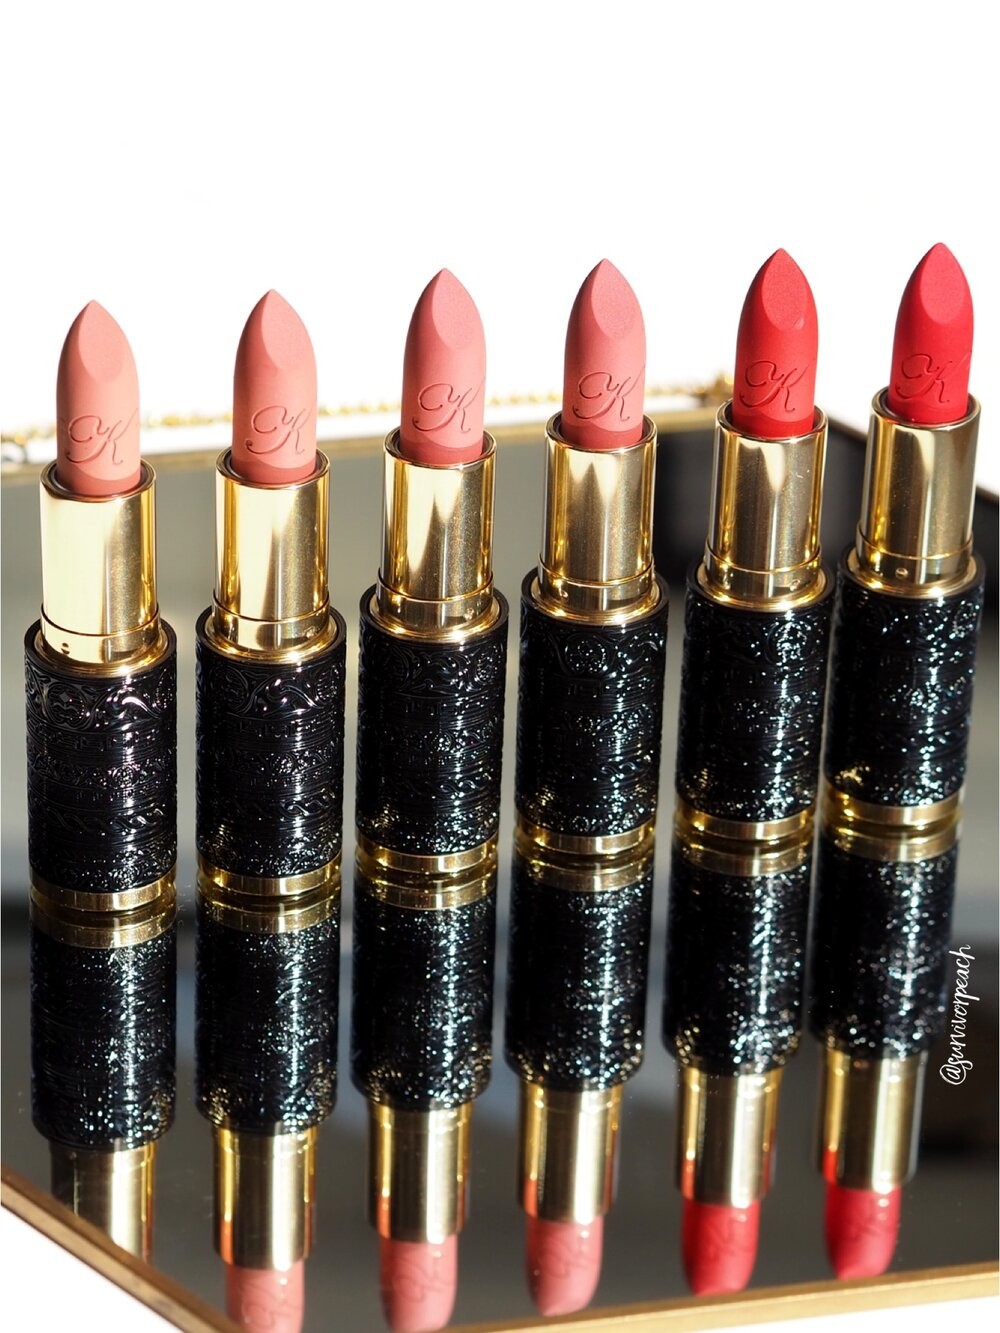 The World's Most Expensive Lipsticks You Probably Won't Buy